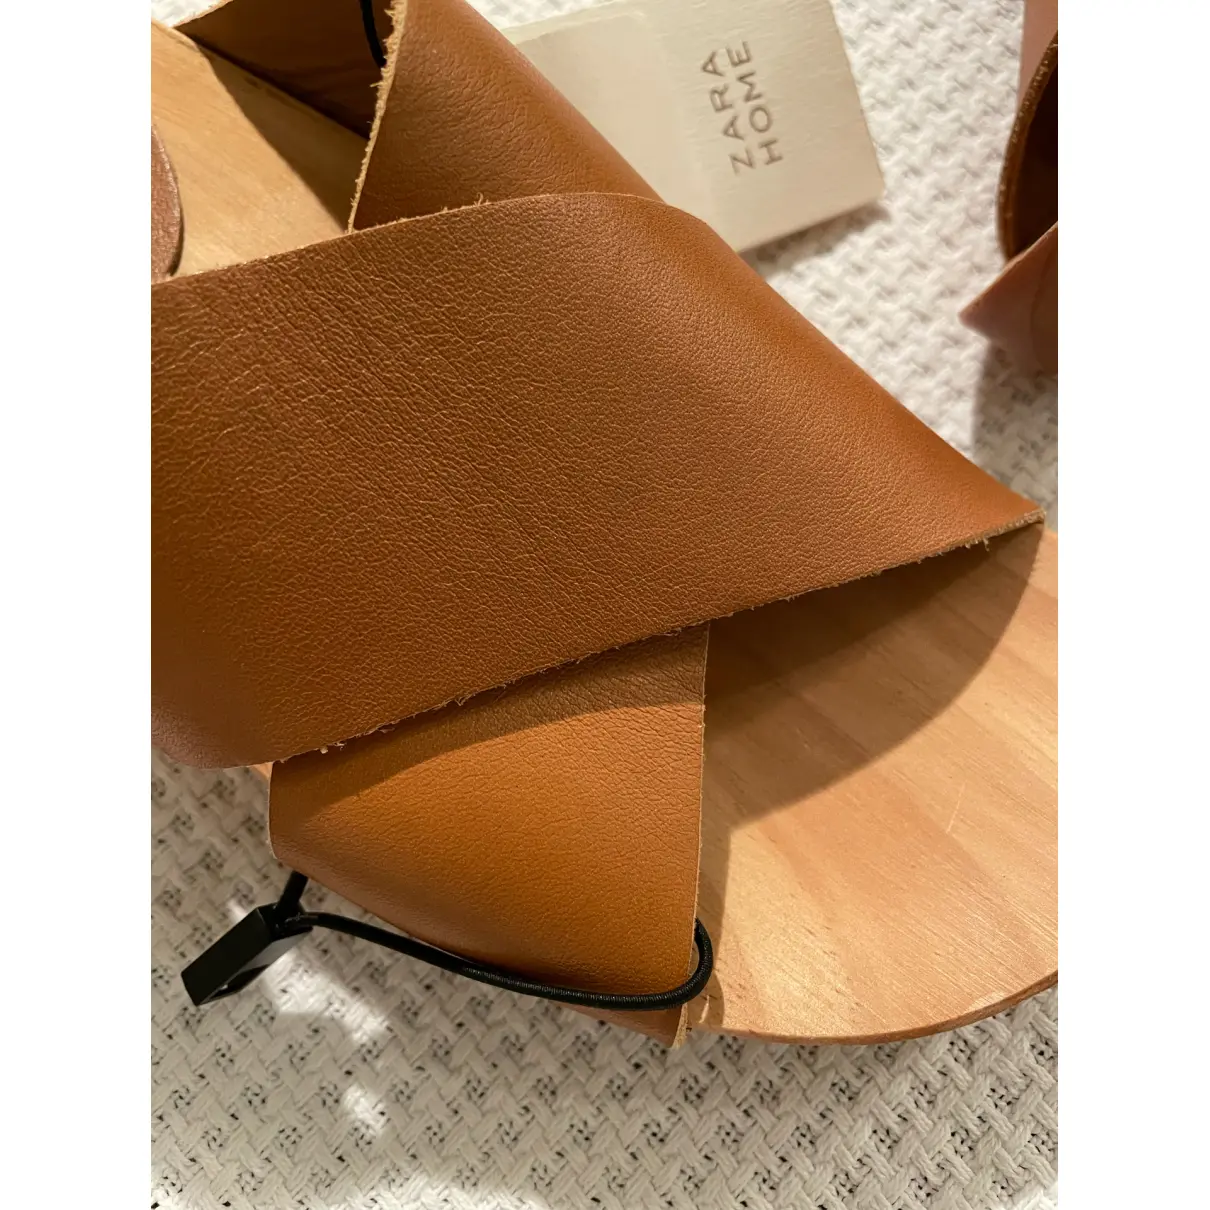 Buy Zara Leather mules & clogs online